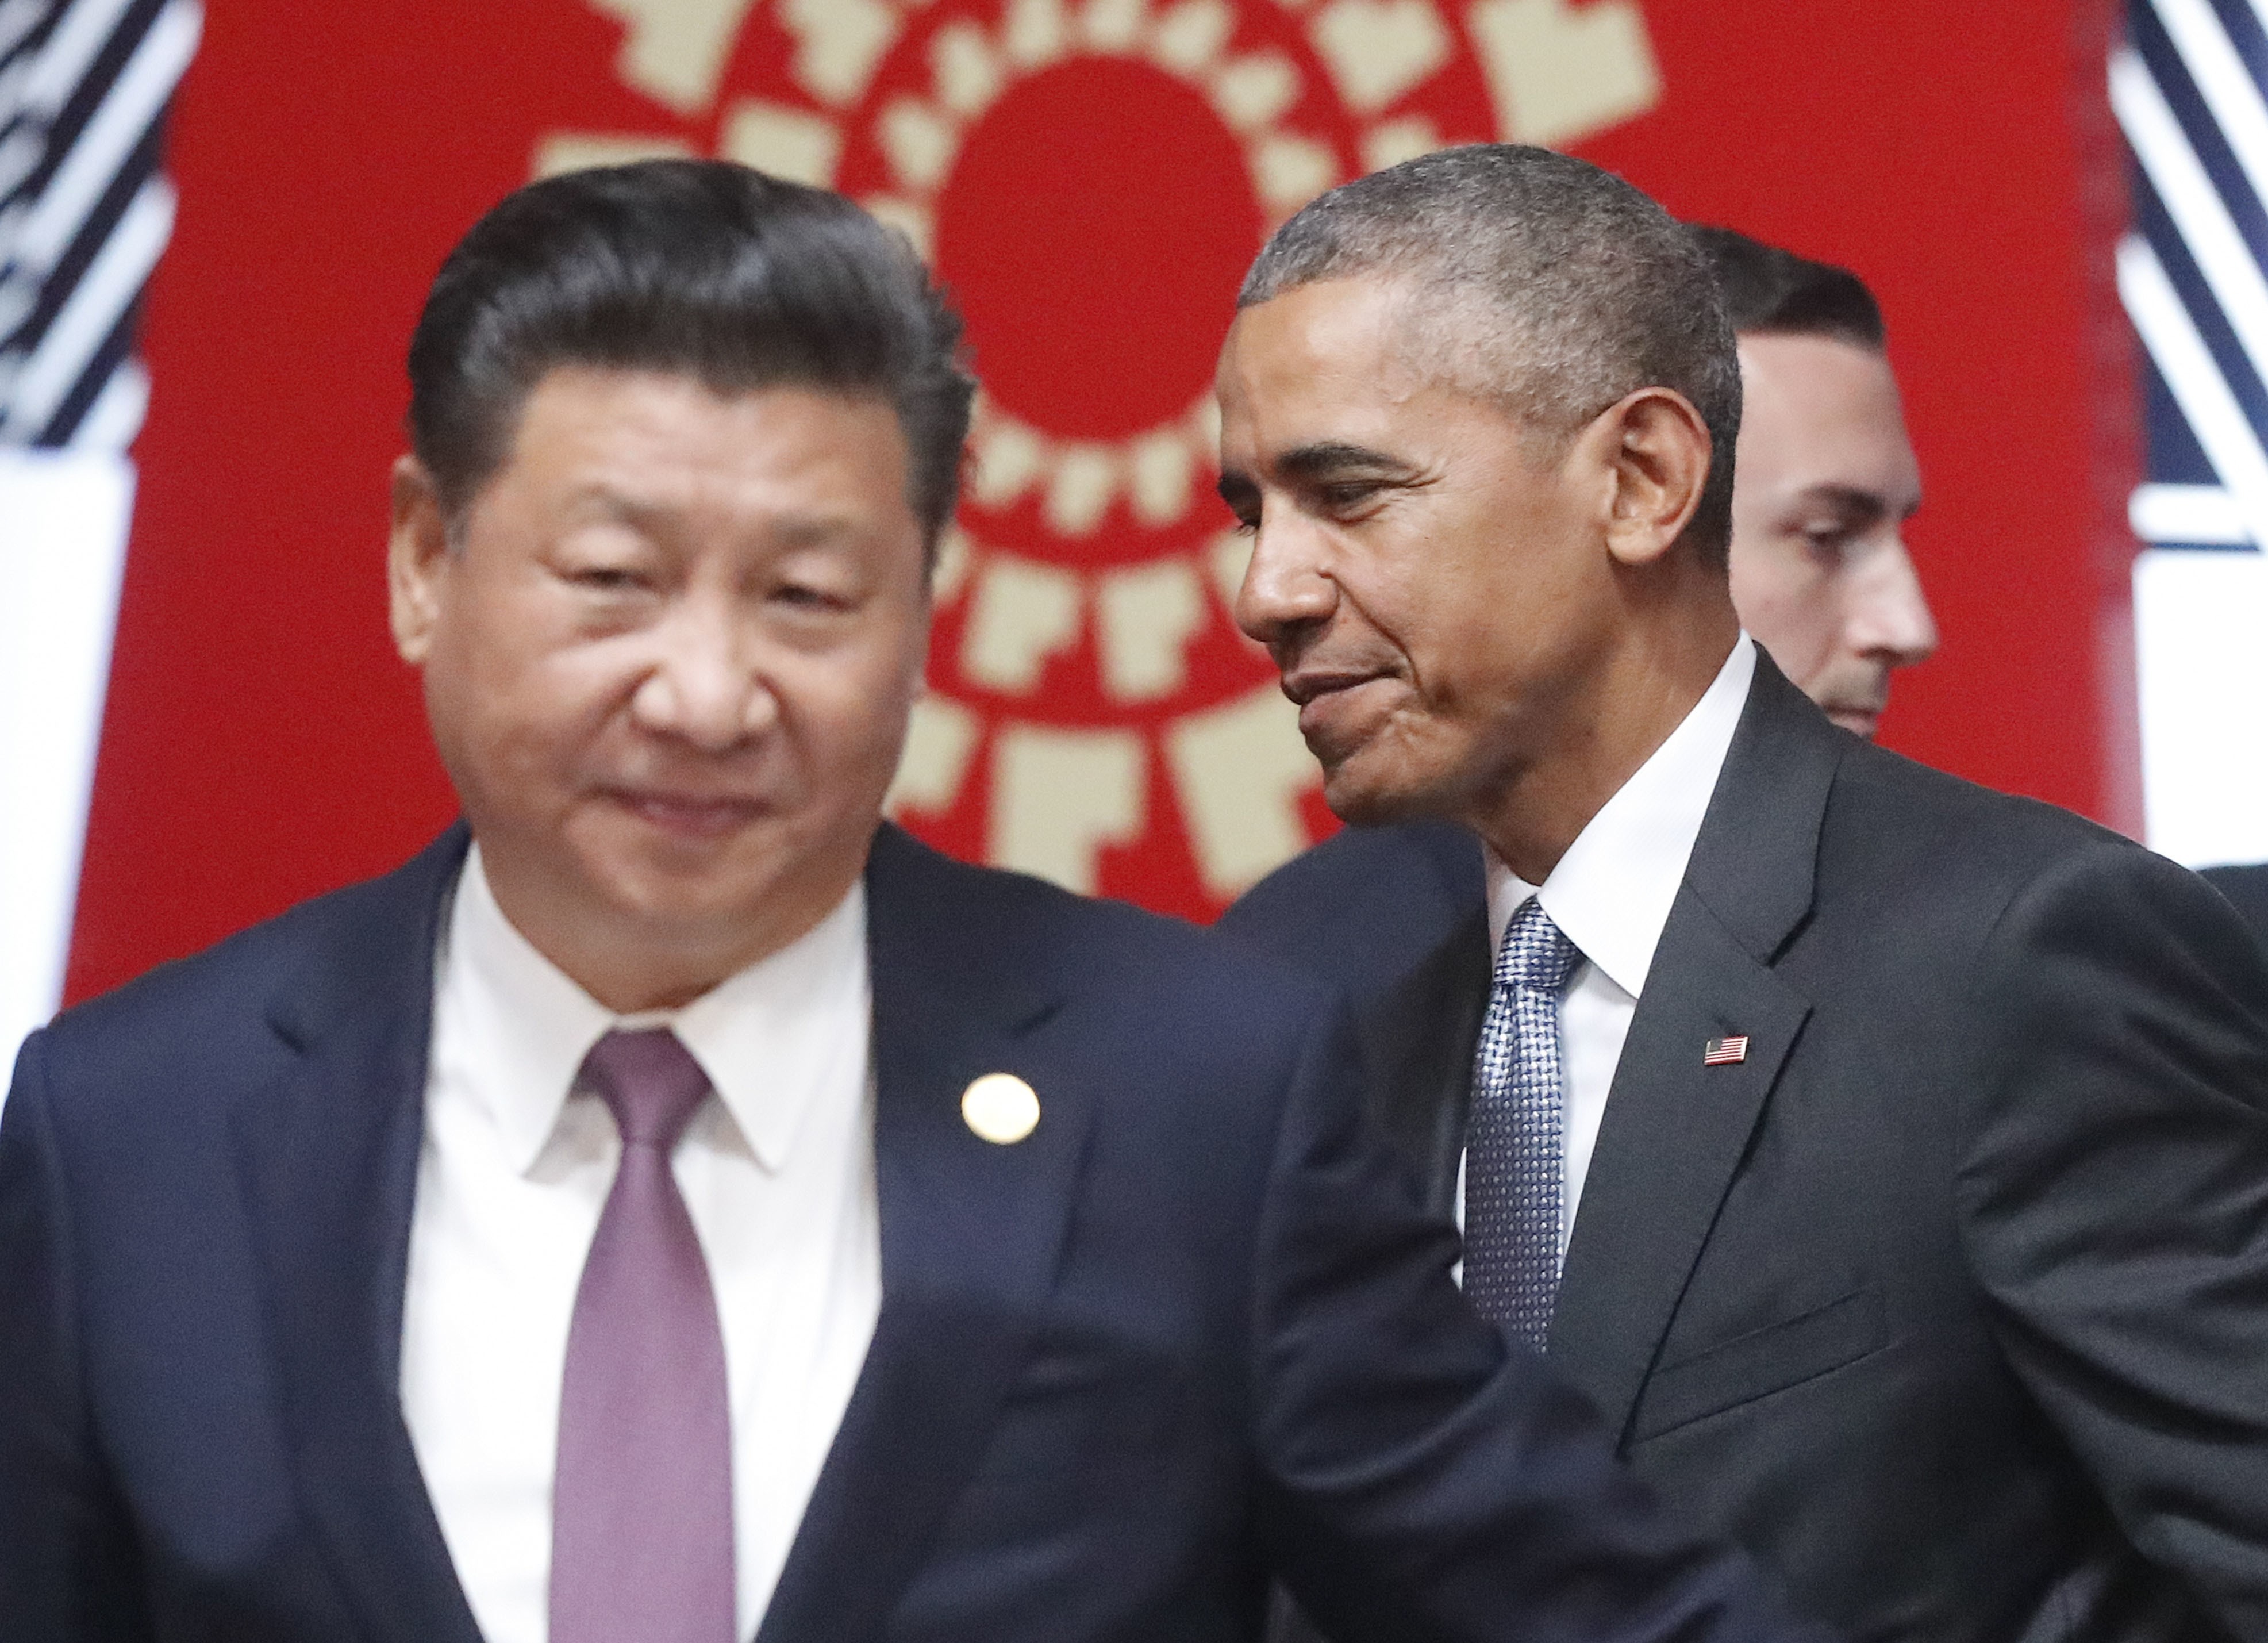 The US under then-president Barack Obama, cooperated with China and President Xi Jinping on climate change, and Beijing continues to defend the Paris Agreement of 2016 even after the Trump administration’s departure from it. Photo: AP